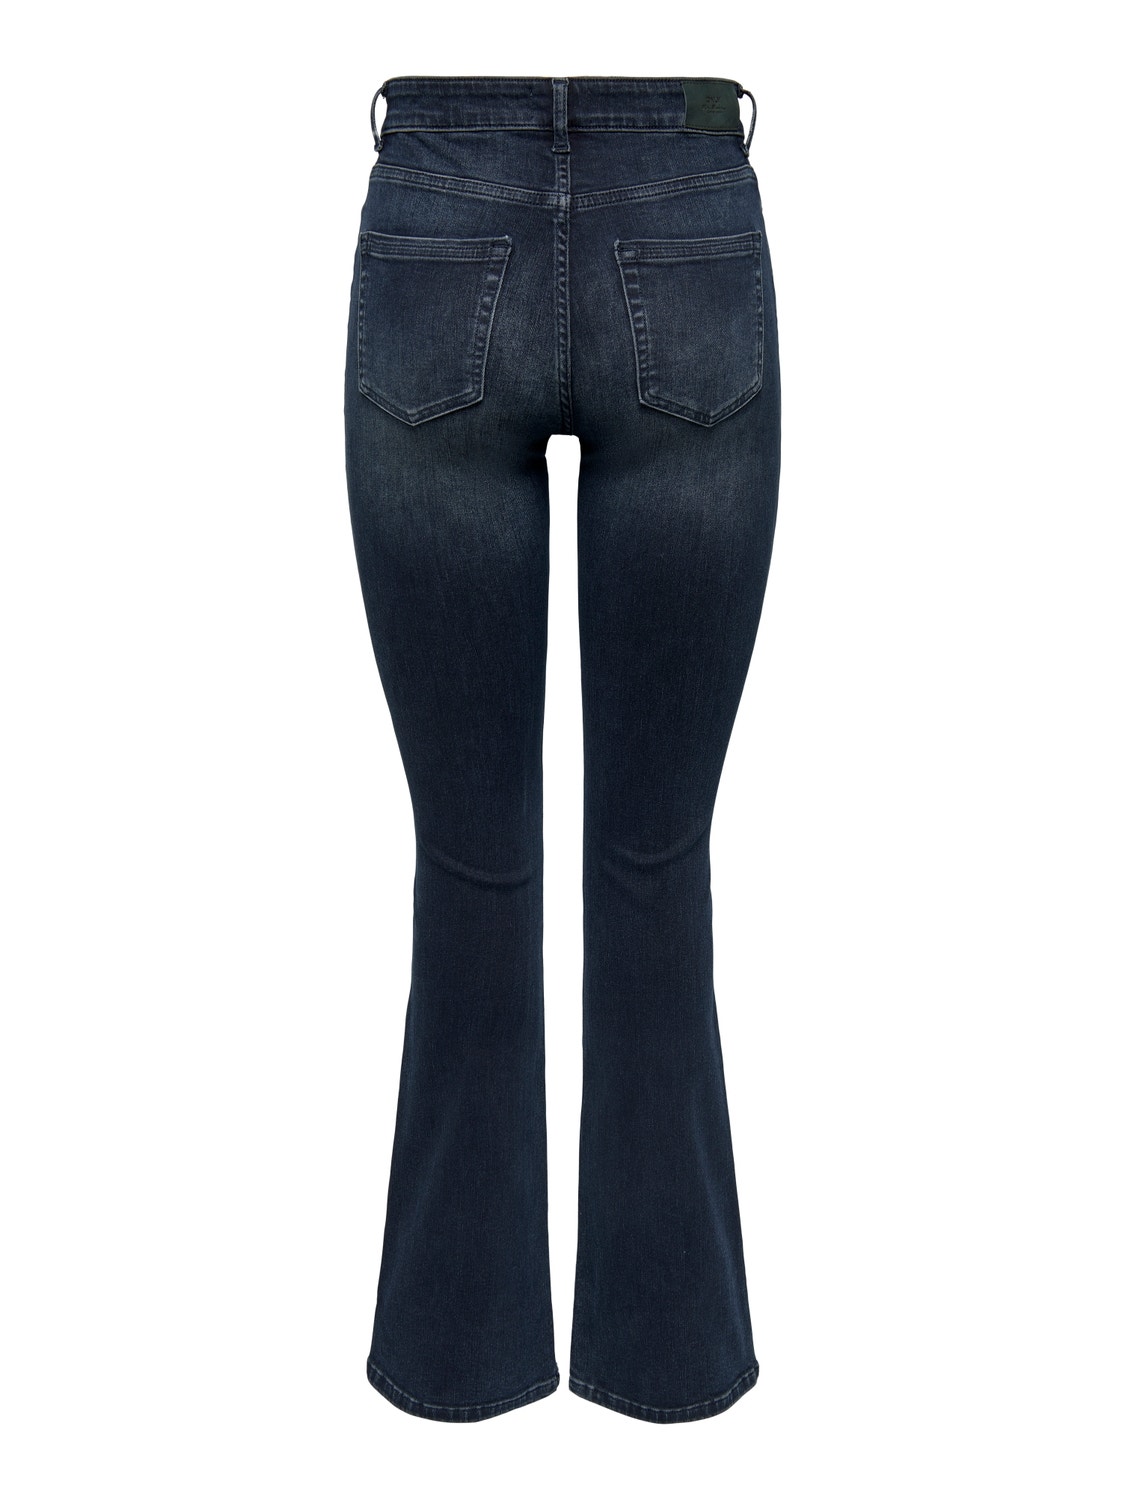 ONLY Jeans Flared Fit Taille moyenne -Blue Black Denim - 15233833